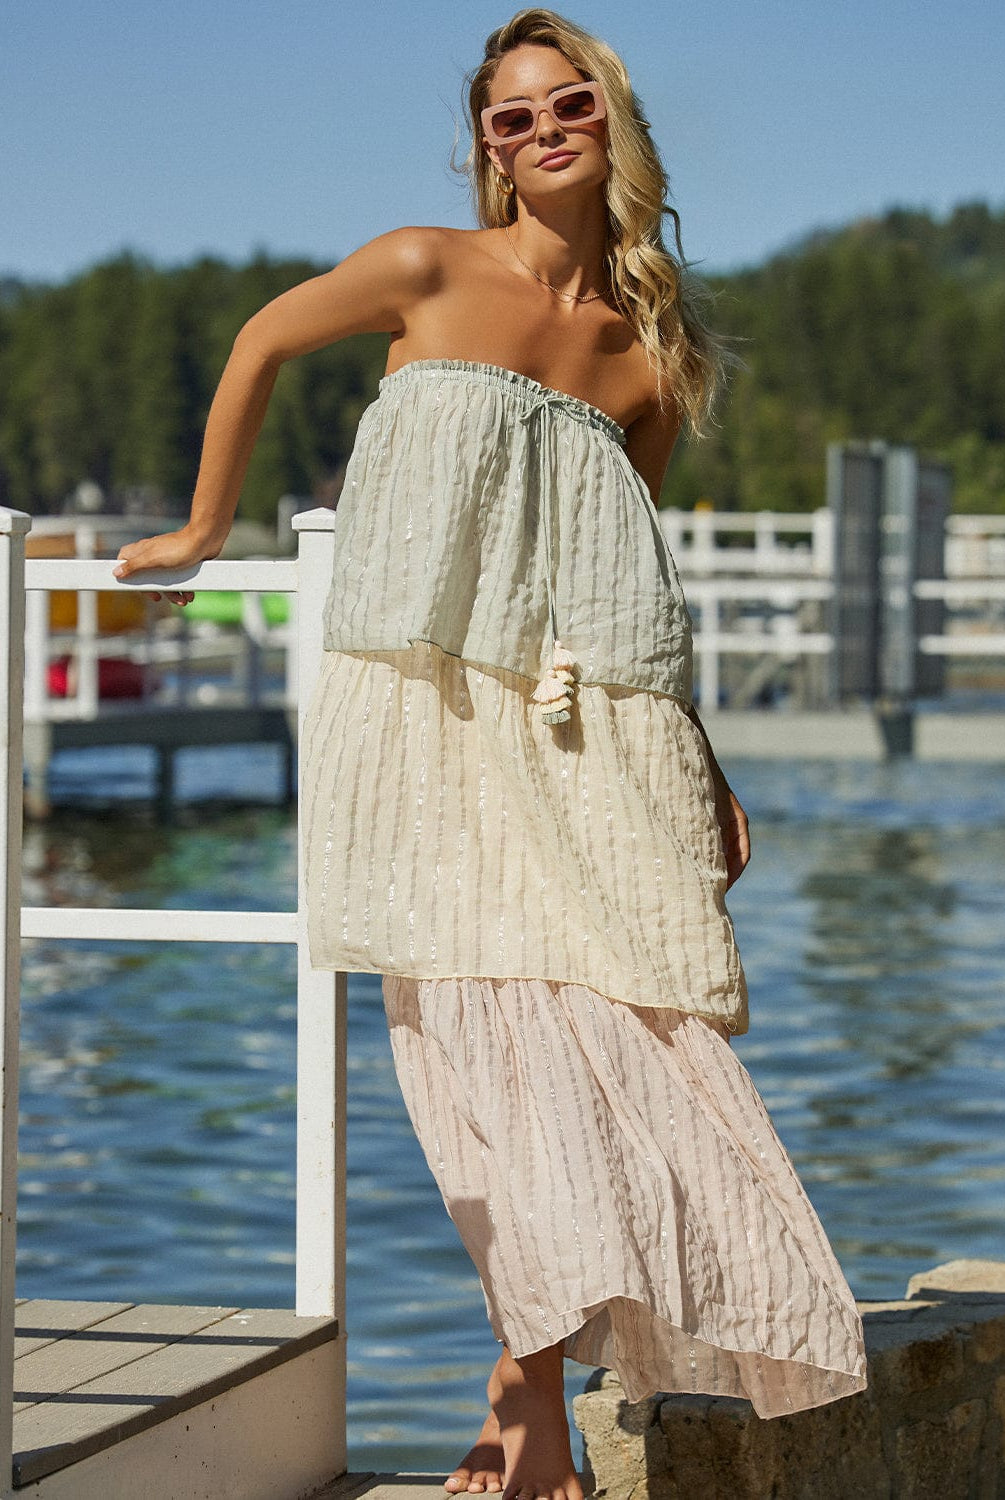 A blonde woman wearing a multi colored floor length dress leaning against a dock near the water.